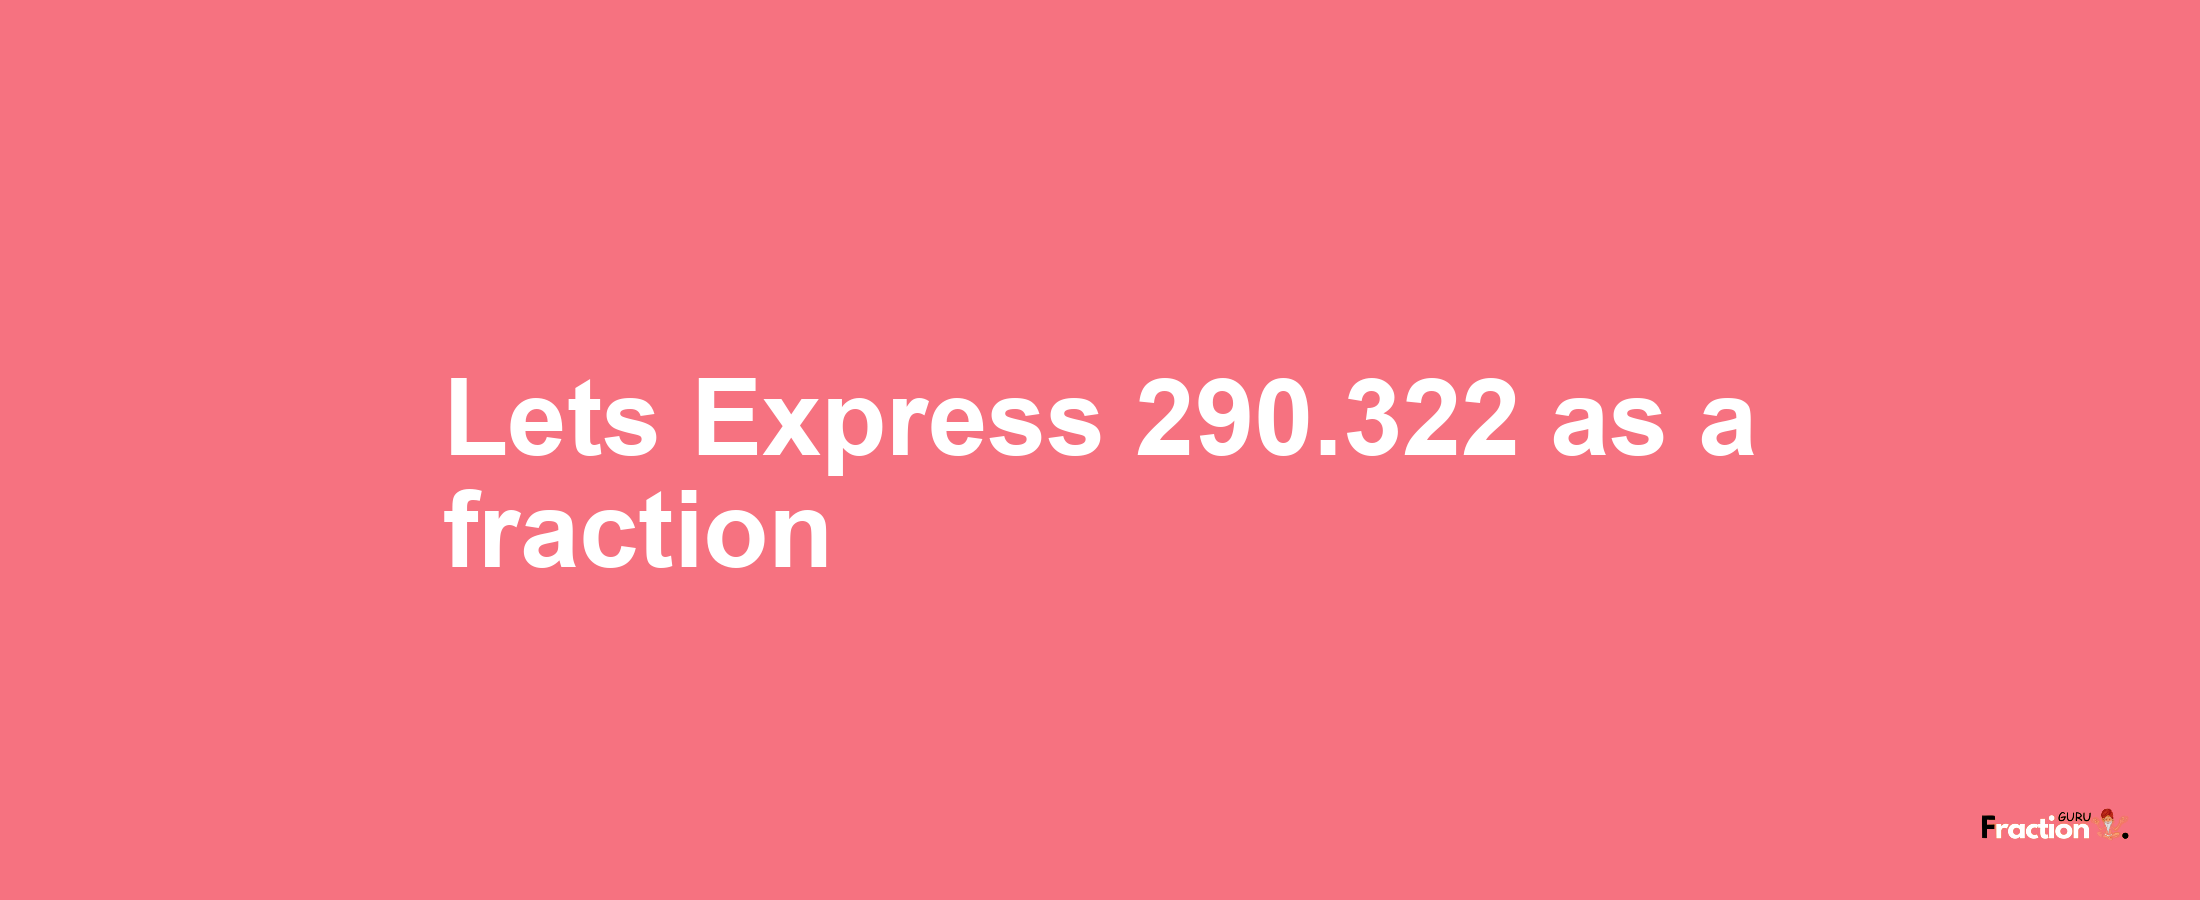 Lets Express 290.322 as afraction